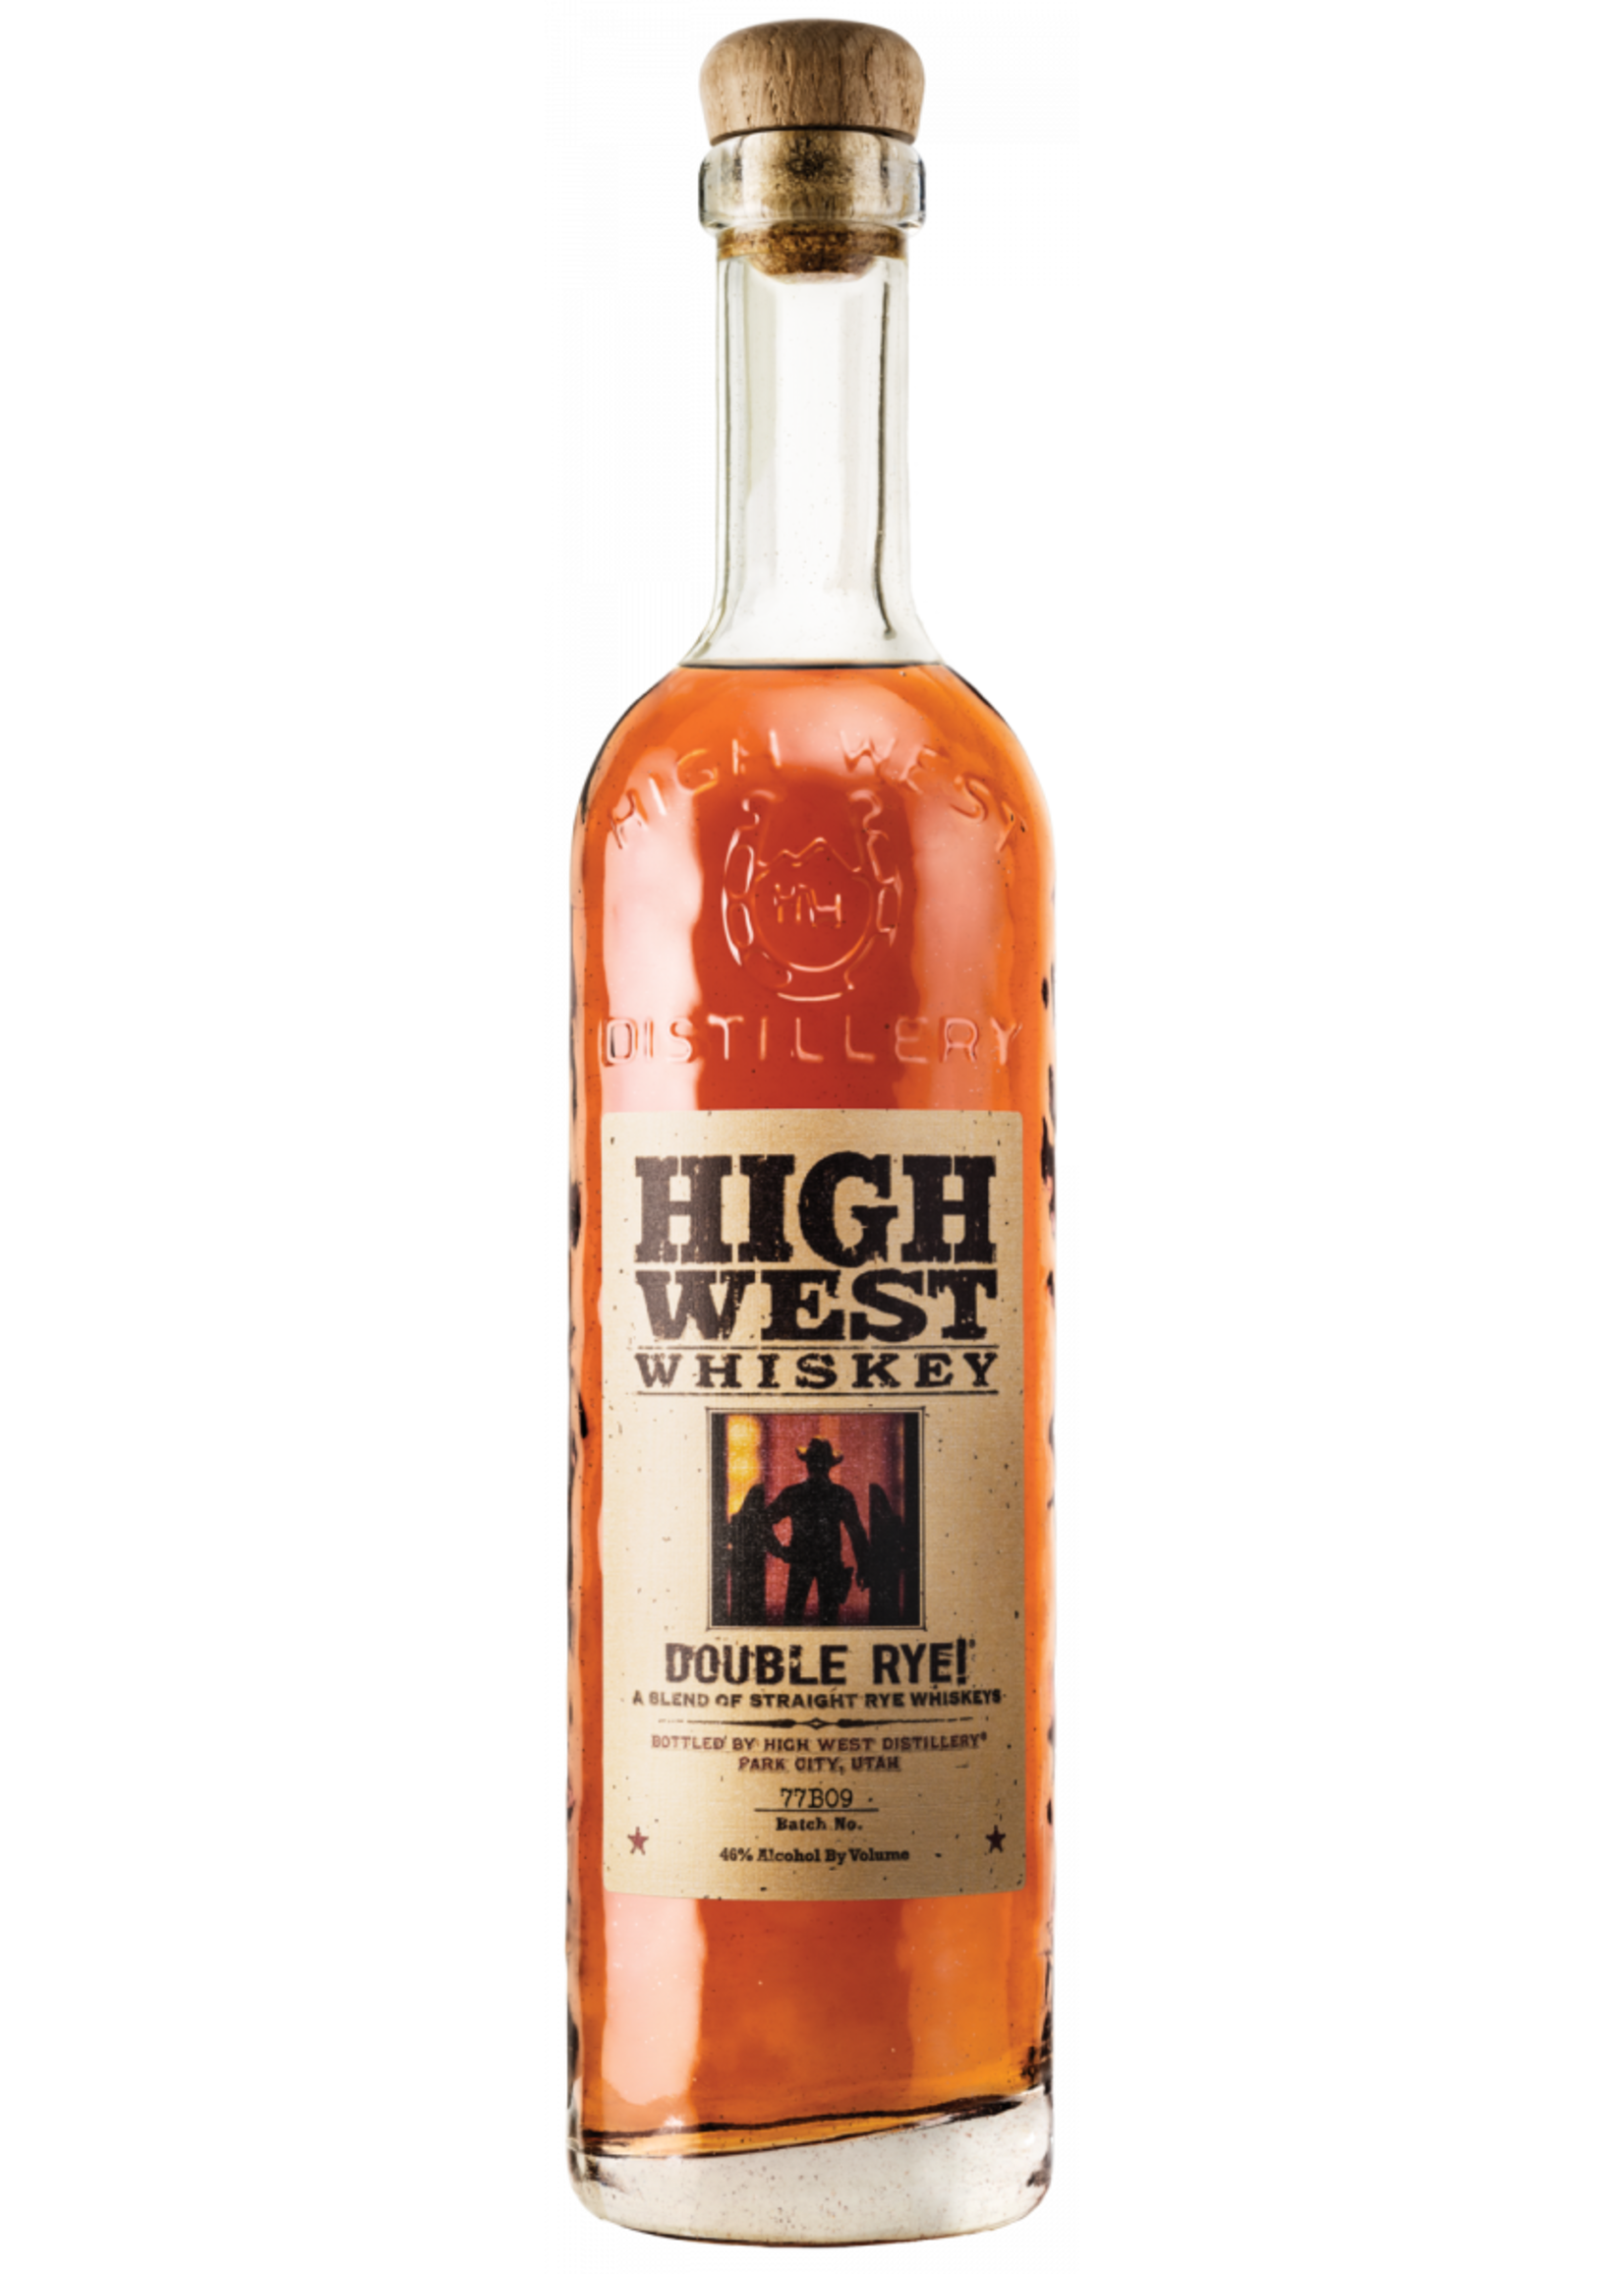 High West High West / Double Rye Whiskey